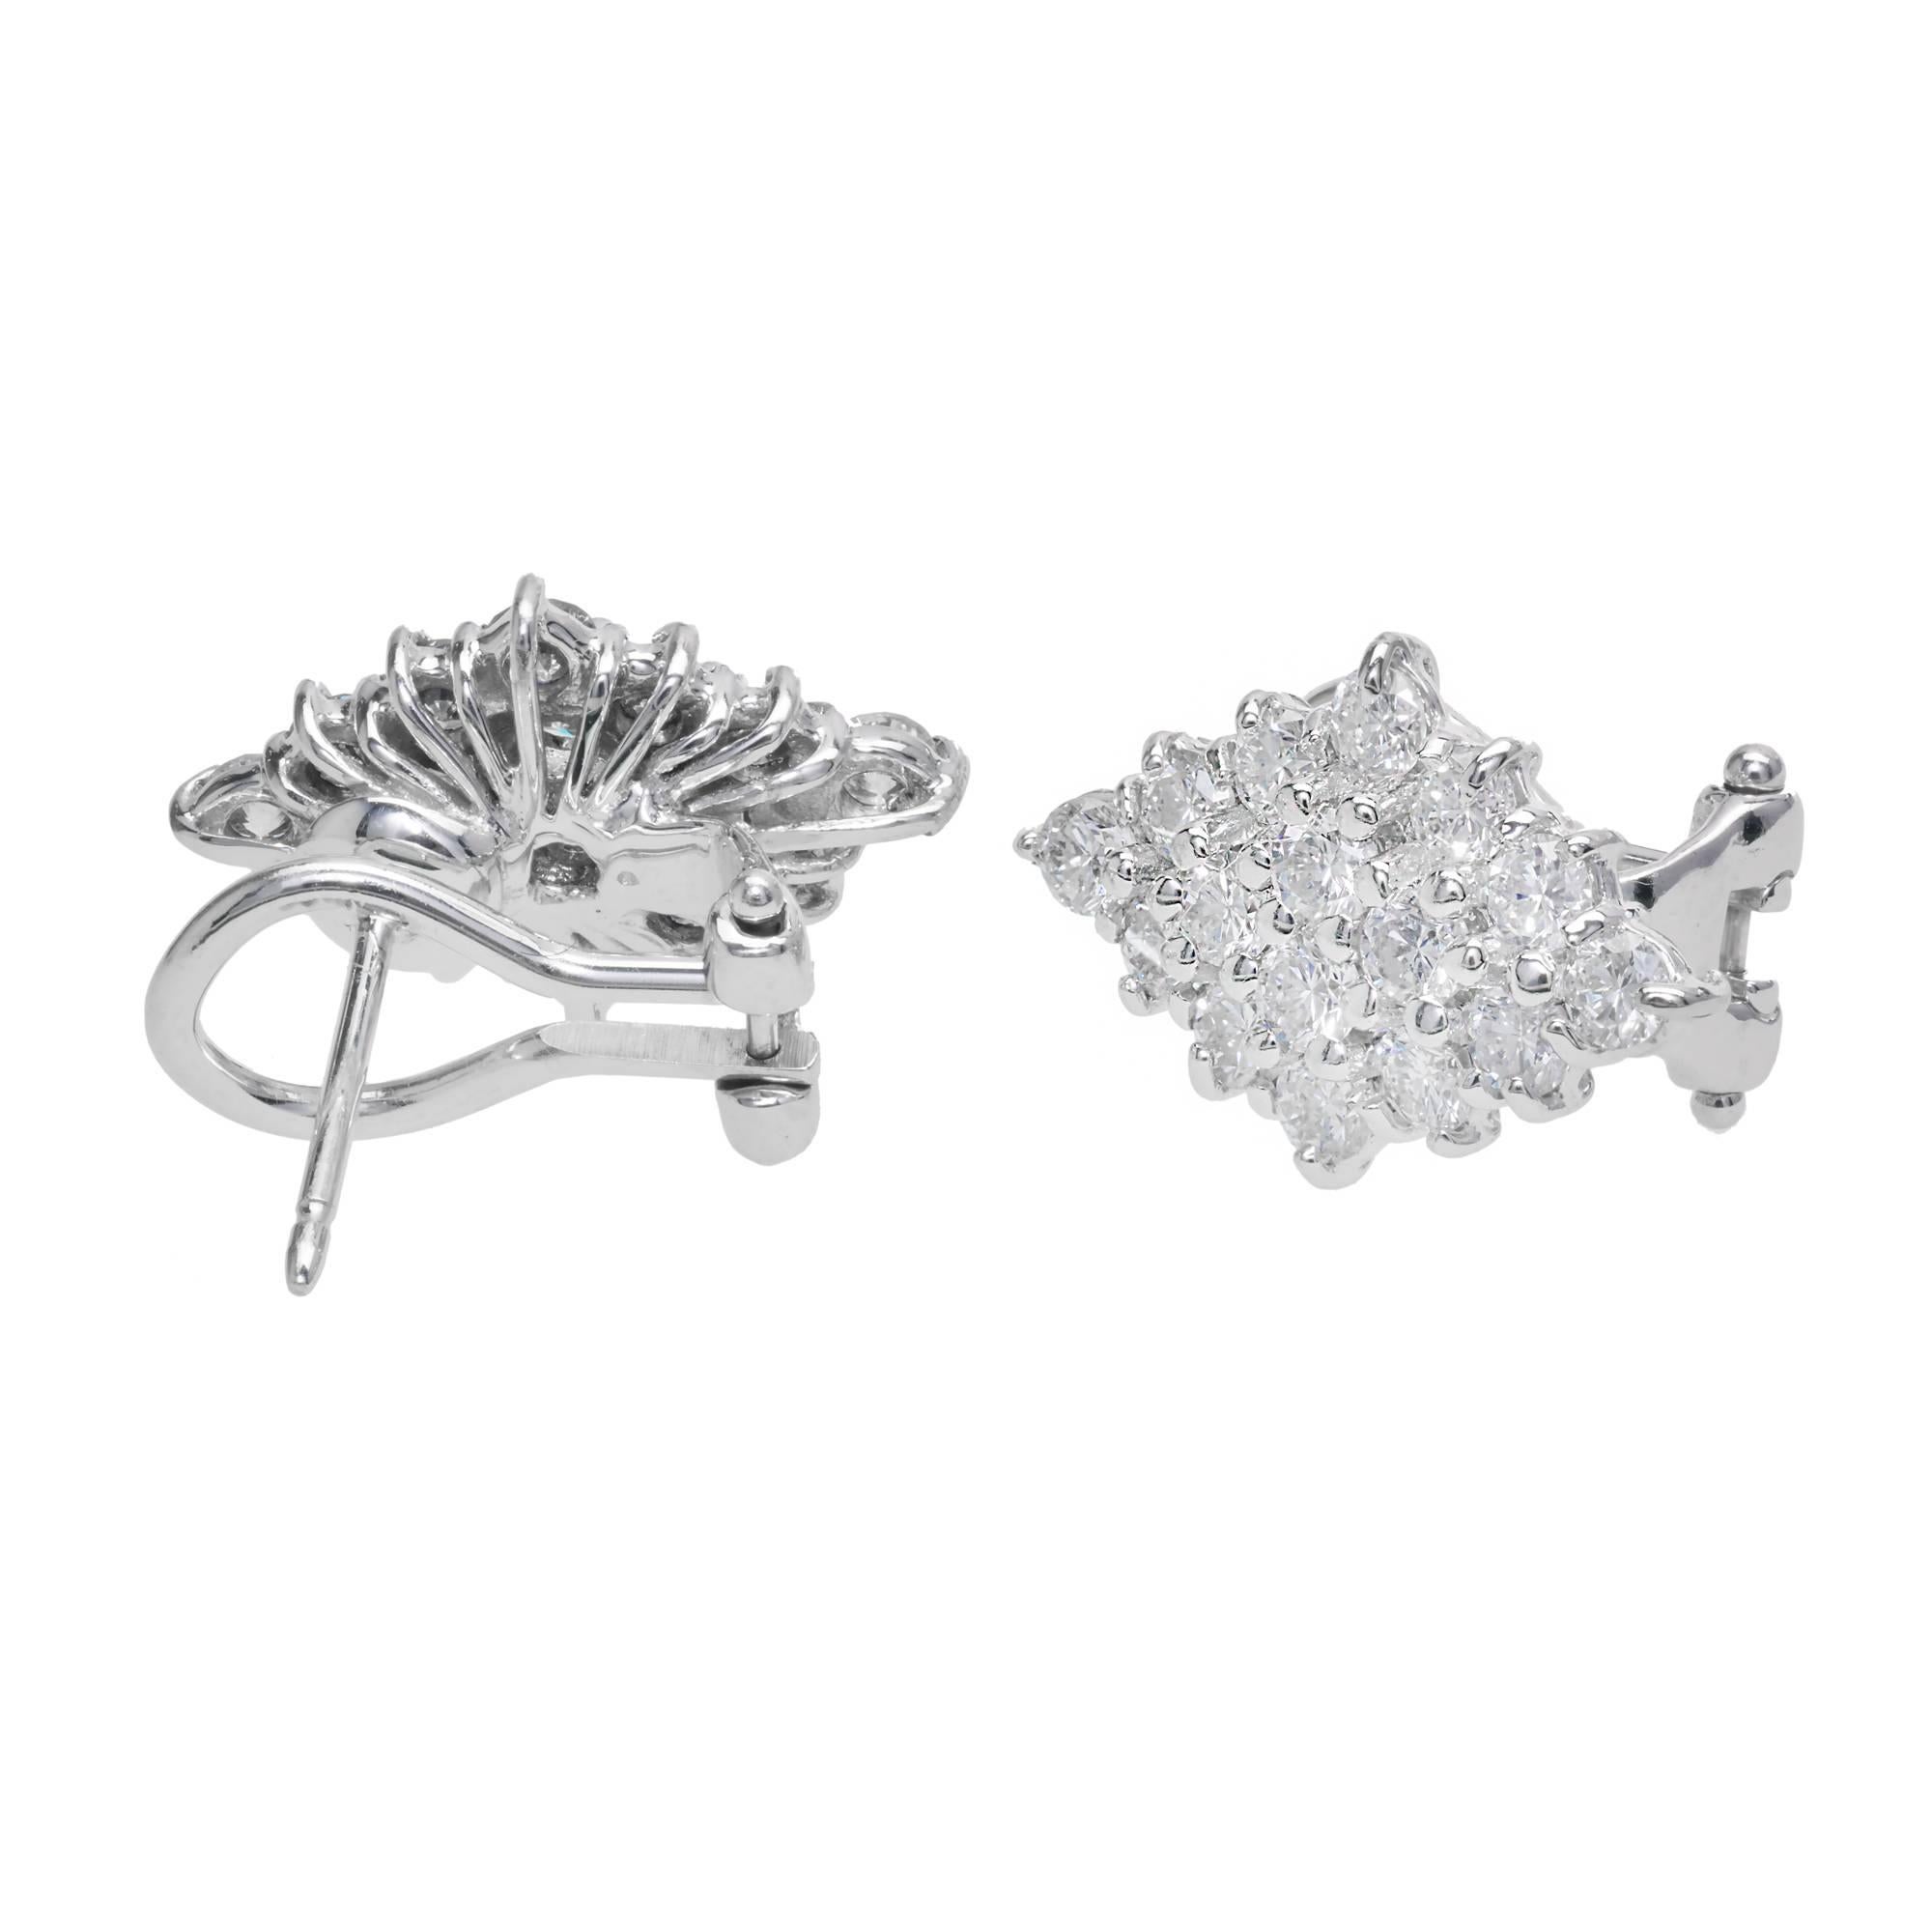 Handmade wire Marquise shaped clip post earrings with bright white sparkly Diamonds. 

32 round Diamonds, approx. total weight 2.00cts, F, SI1 – SI2
14k white gold
Tested: 14k
Stamped: 585
Hallmark: *
7.4 grams
Top to bottom: 18.22mm or .72